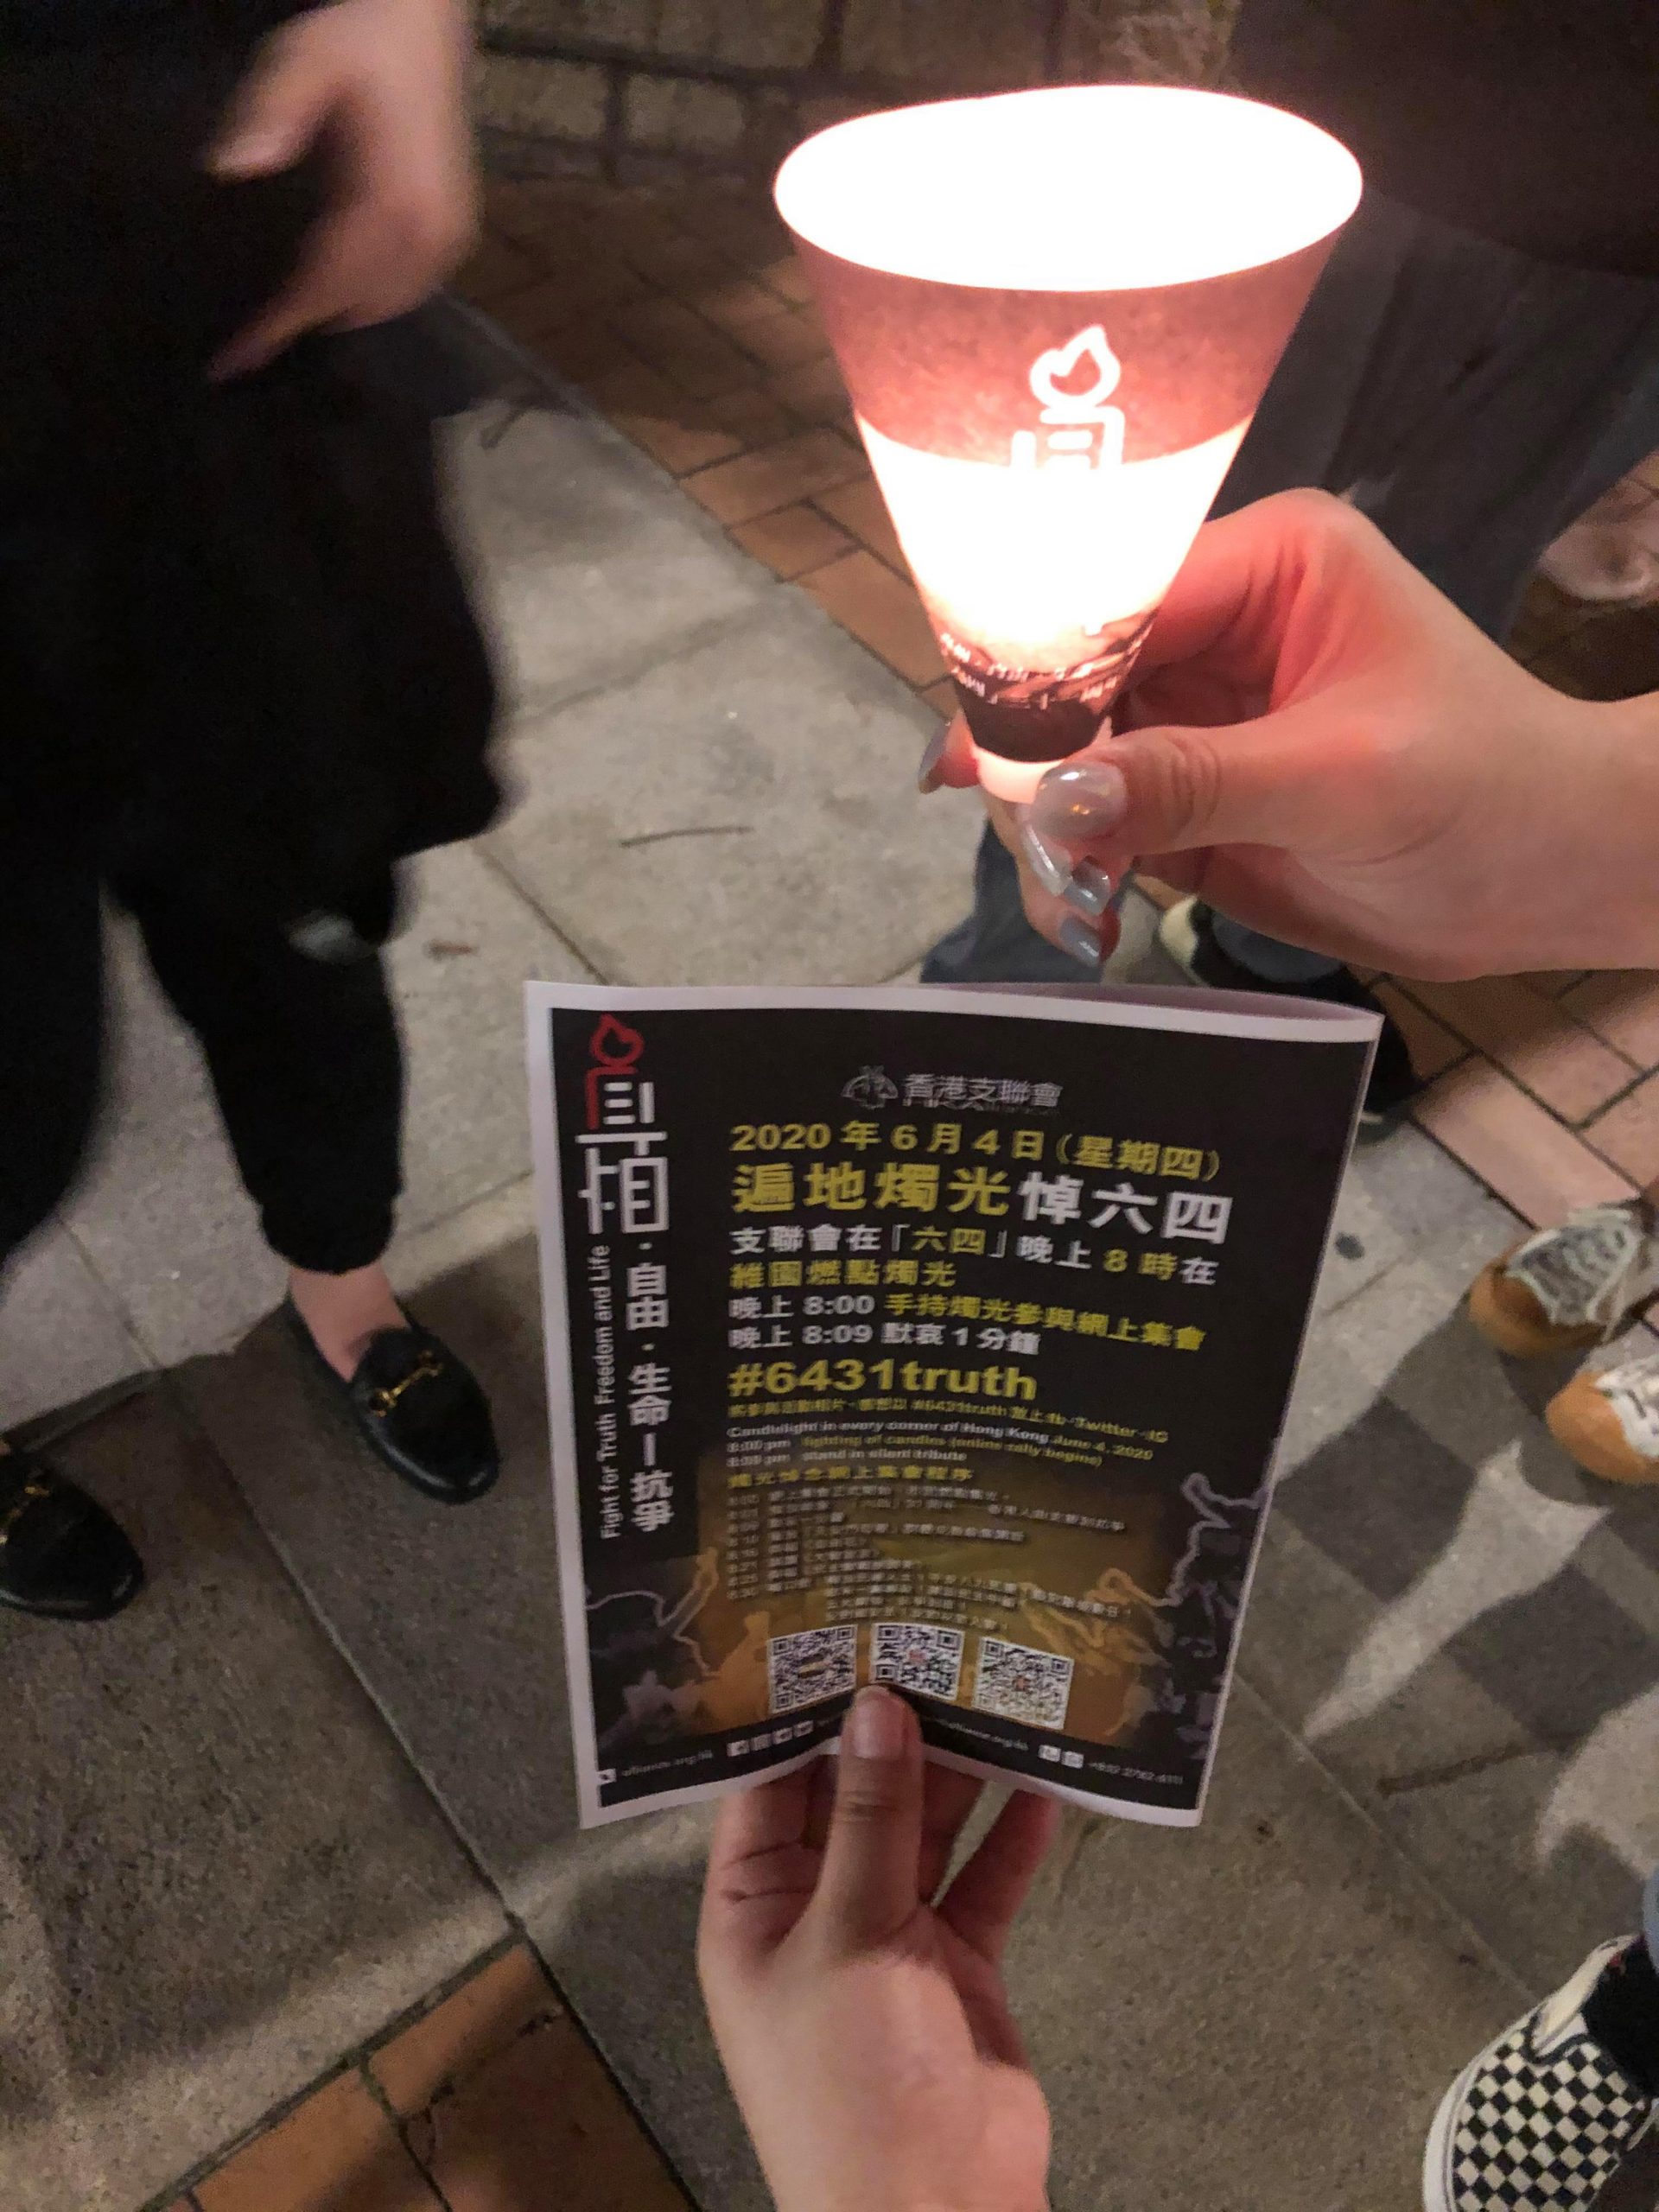 Candlelight vigil for the 31st anniversary of the June 4th incident in Tsing Yi Promenade, Hong Kong